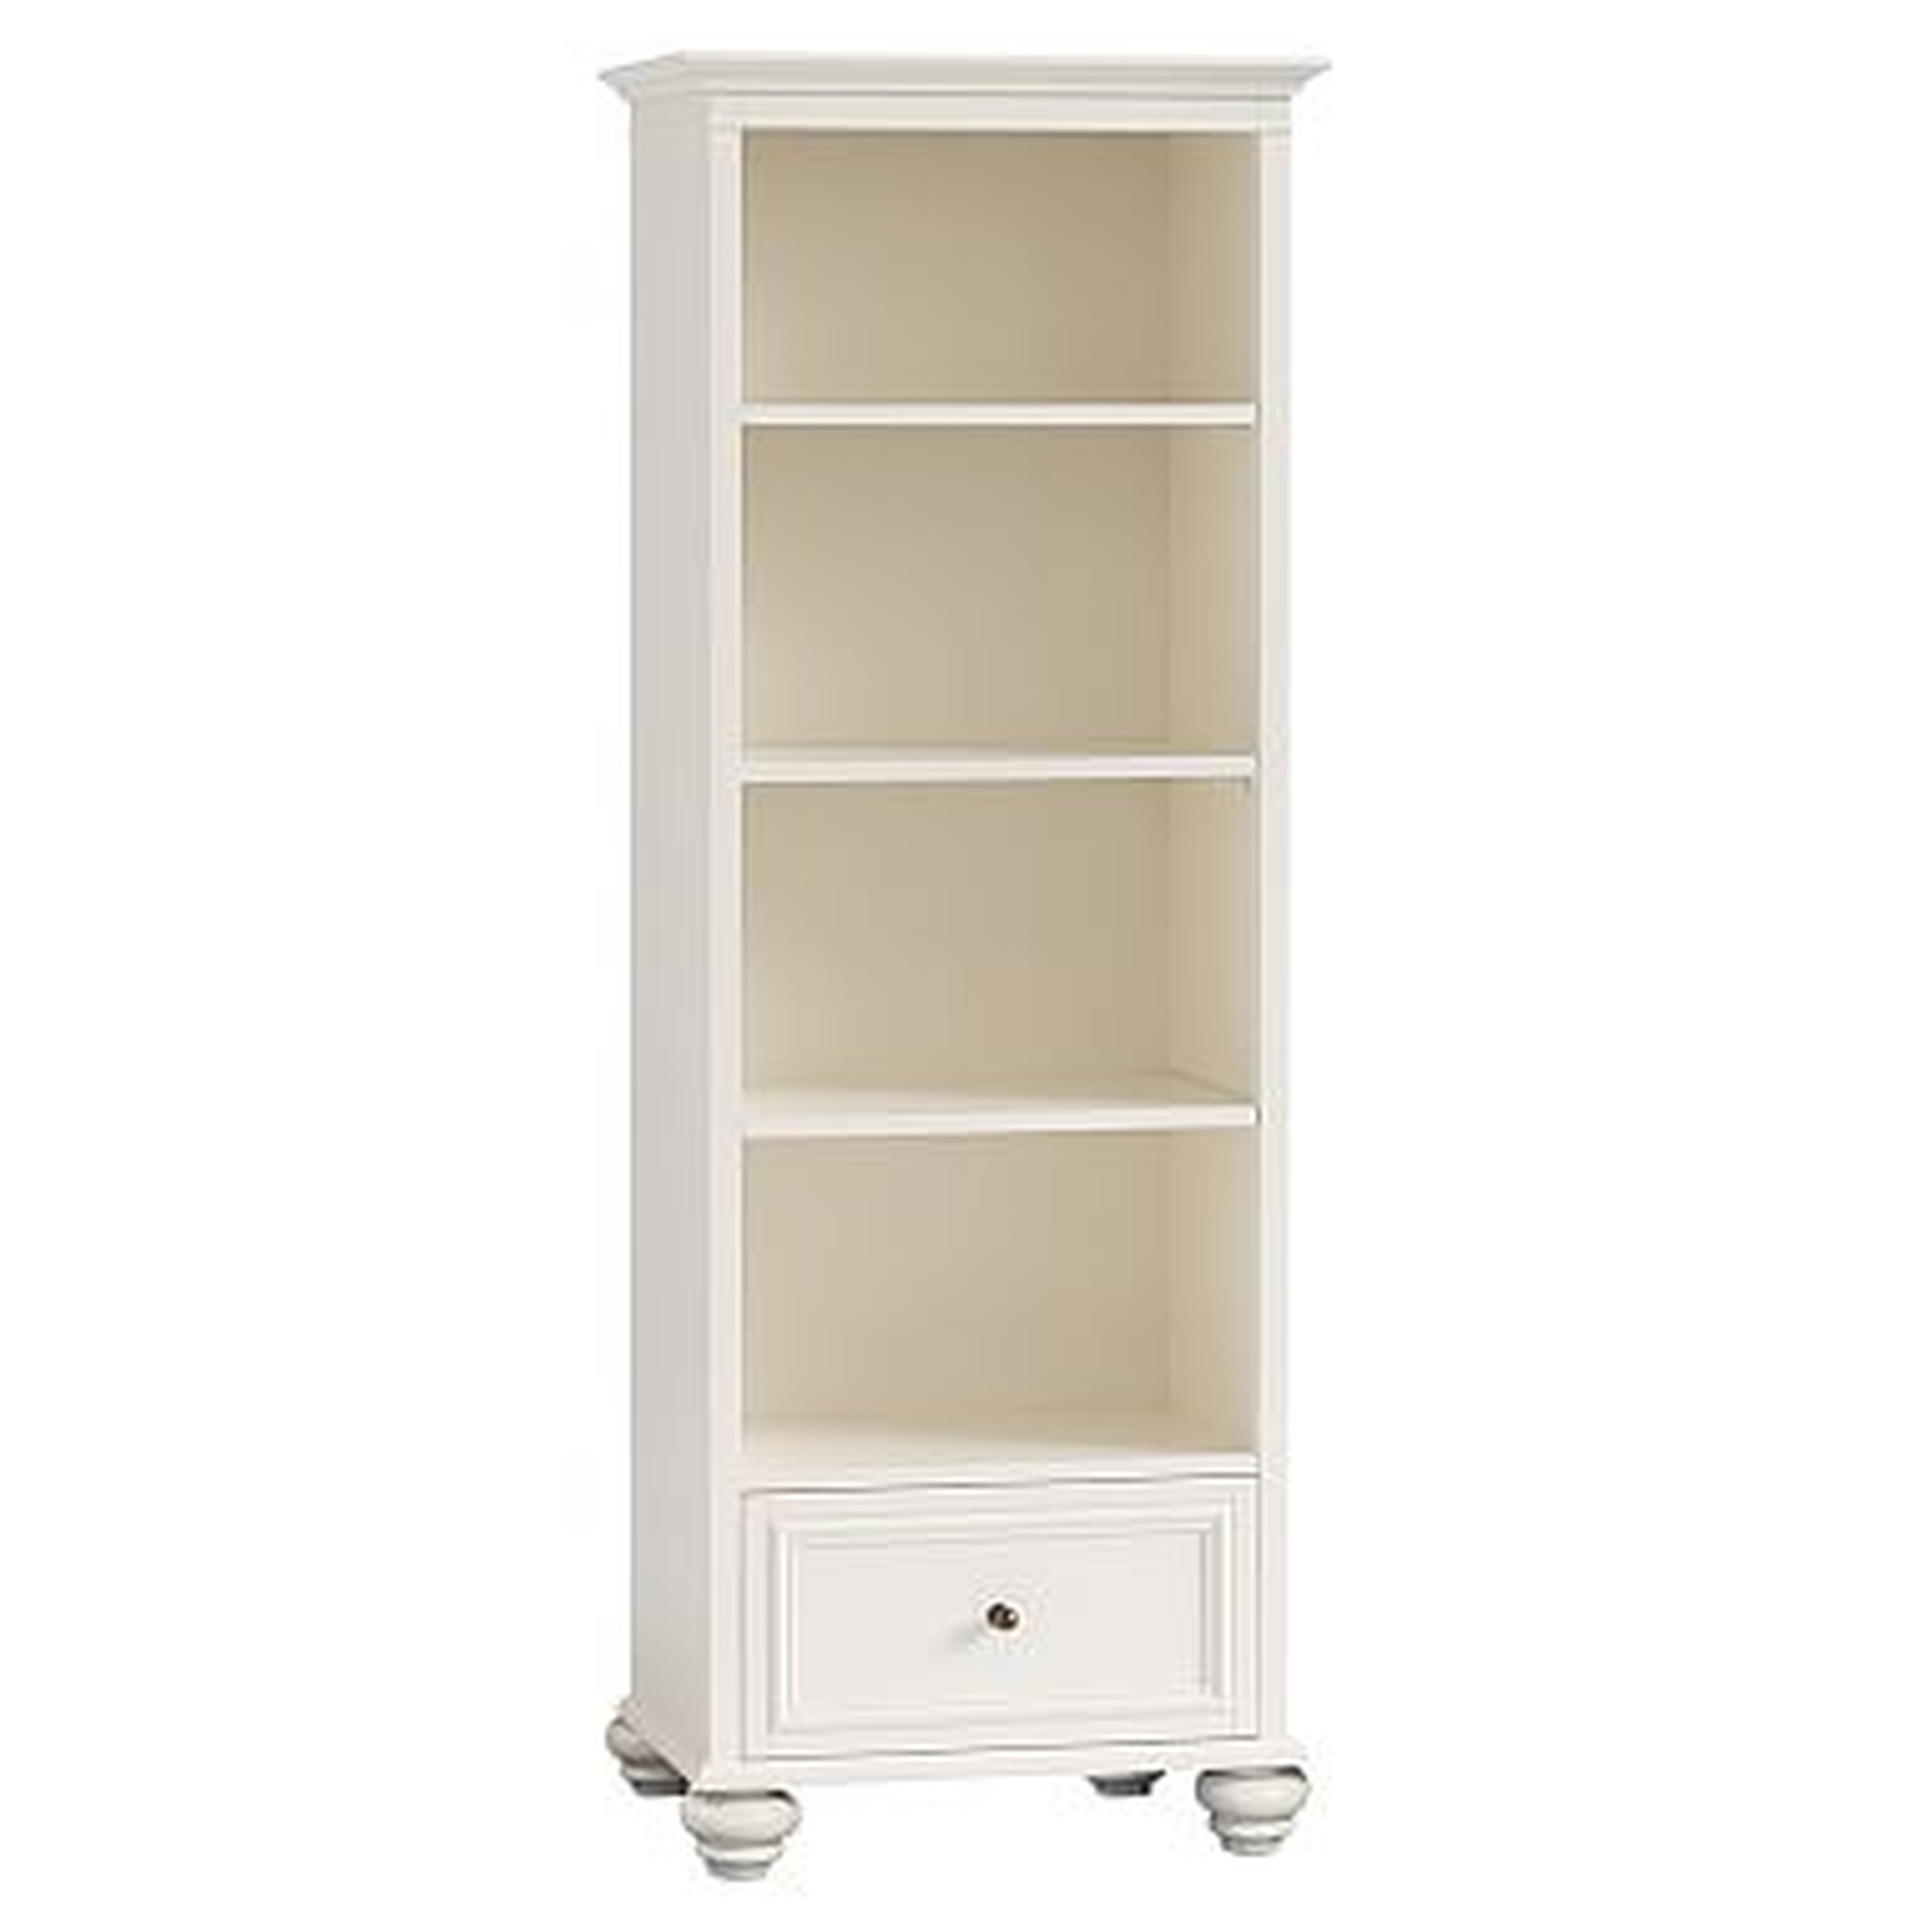 Chelsea Tower Bookcase, Simply White - Pottery Barn Teen